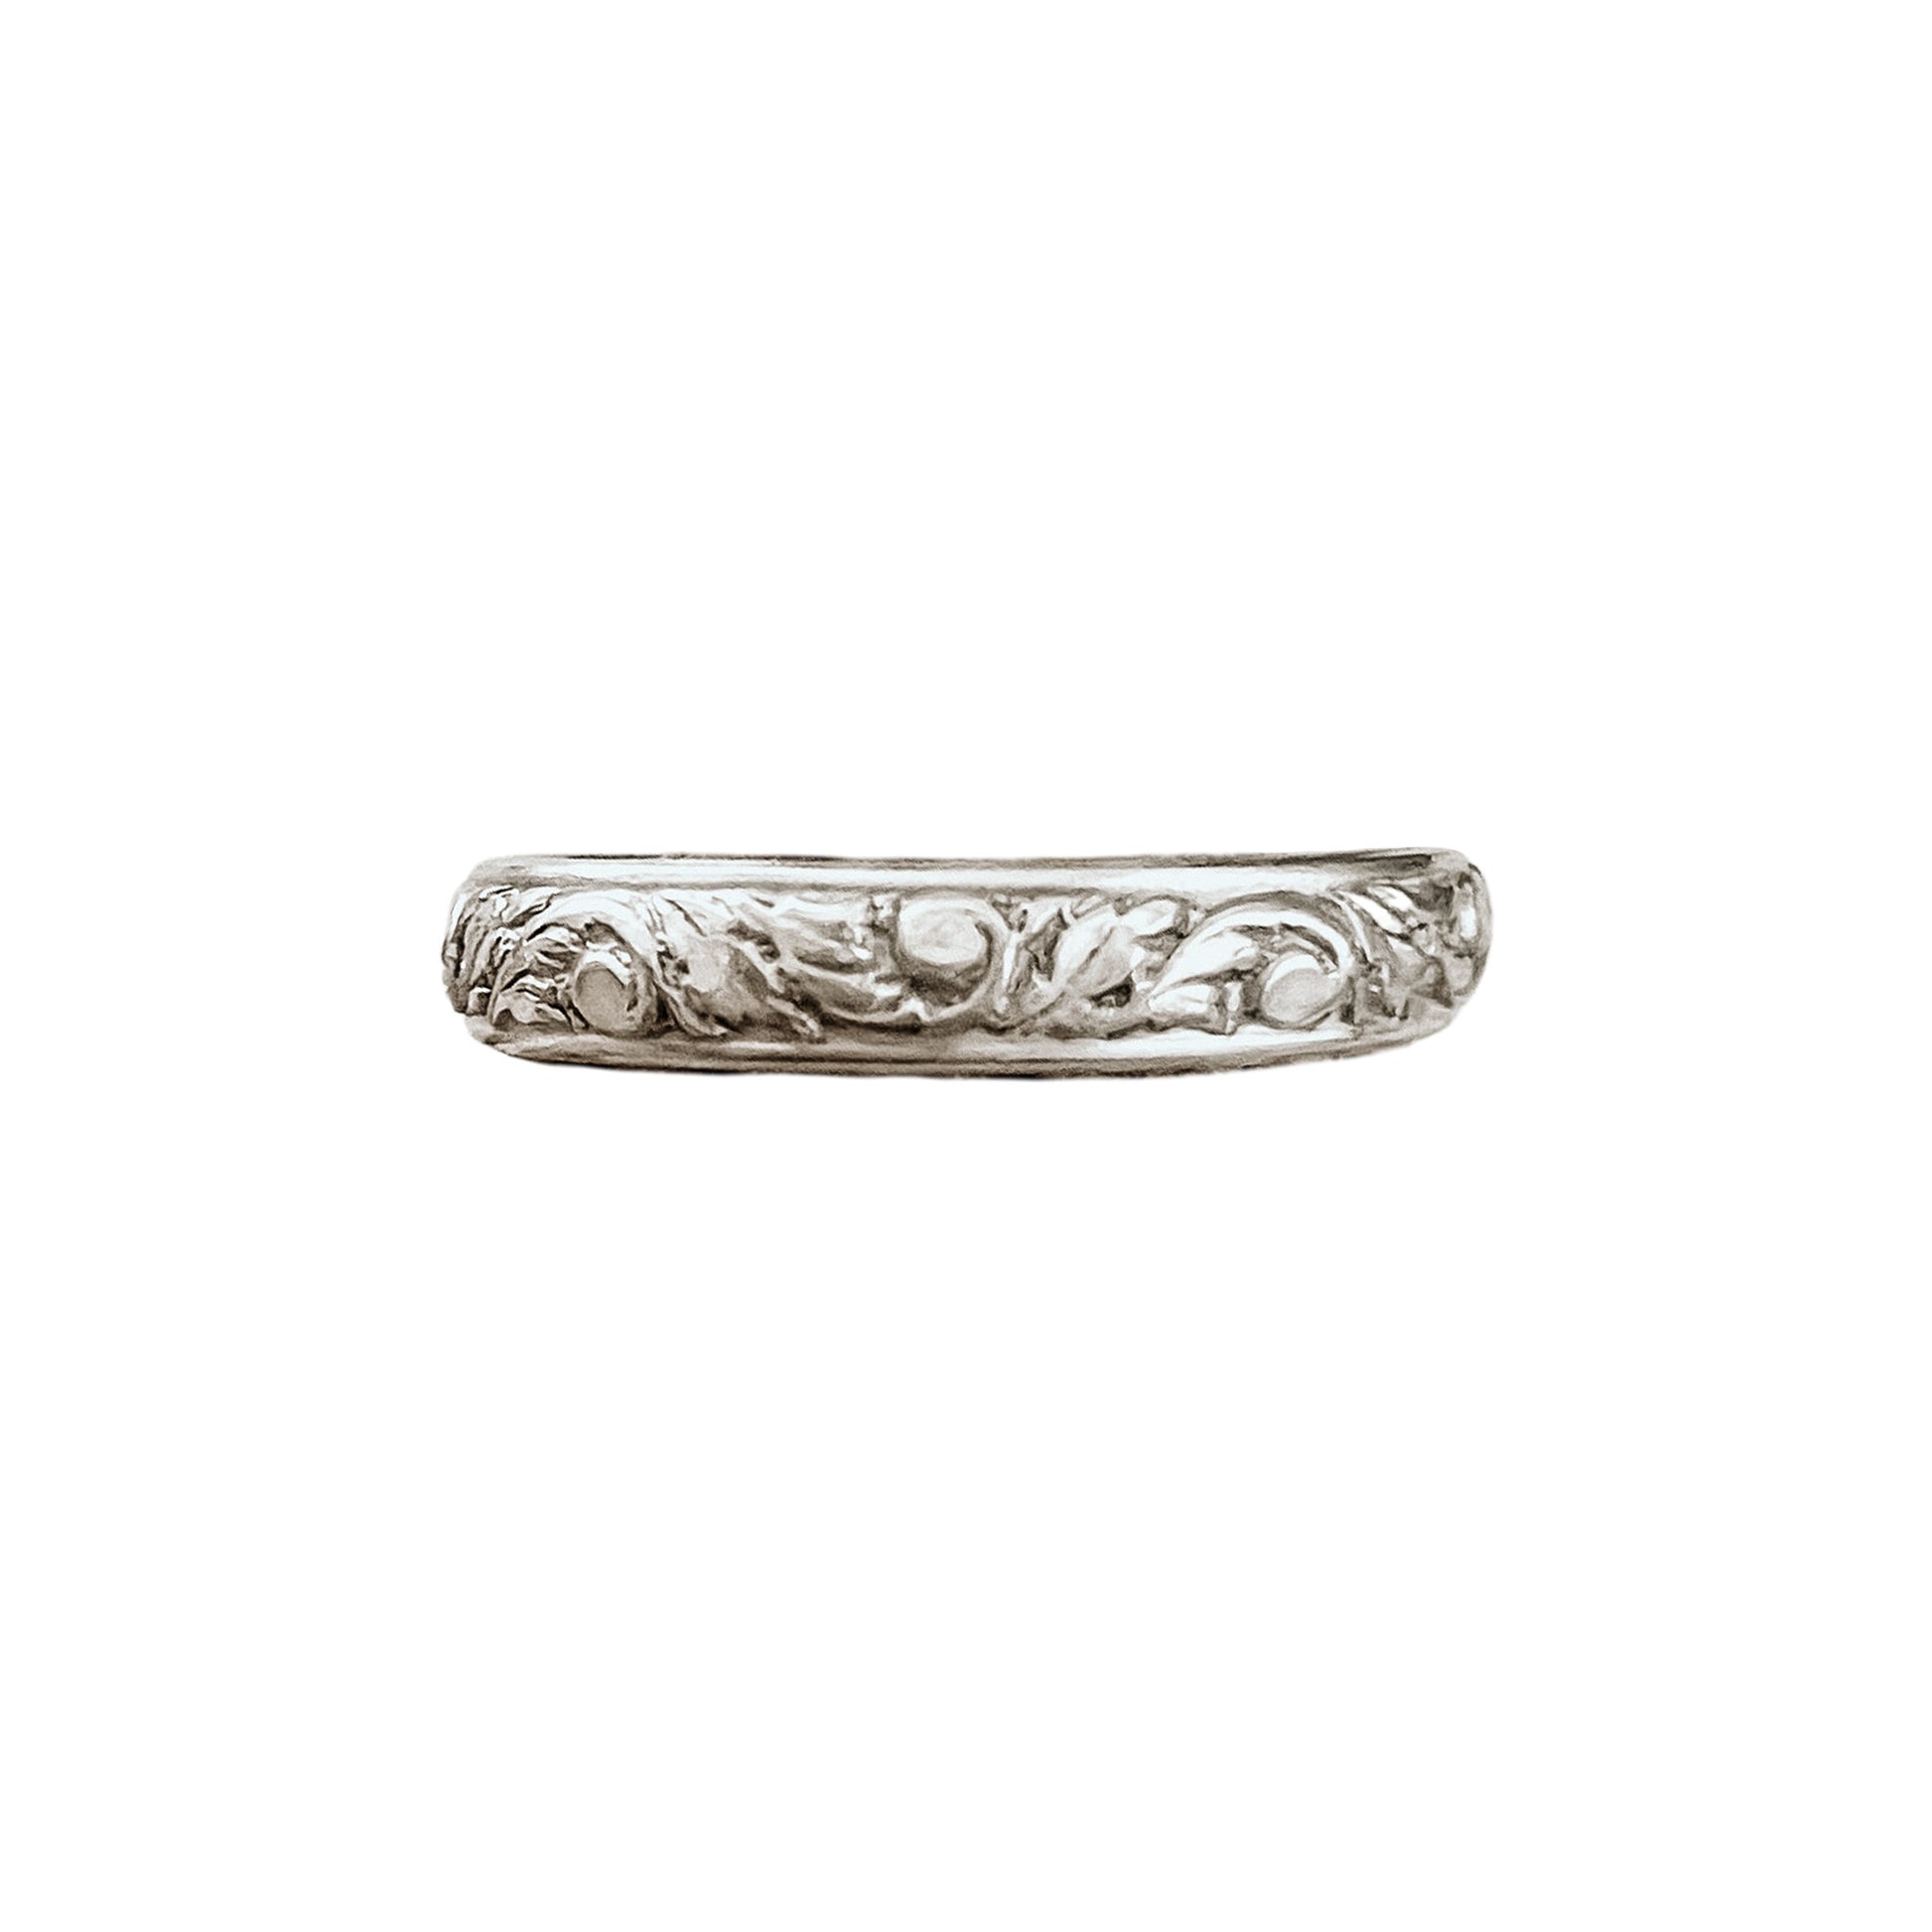 Western Floral Sterling Silver Stacking Ring shown in bright finish.